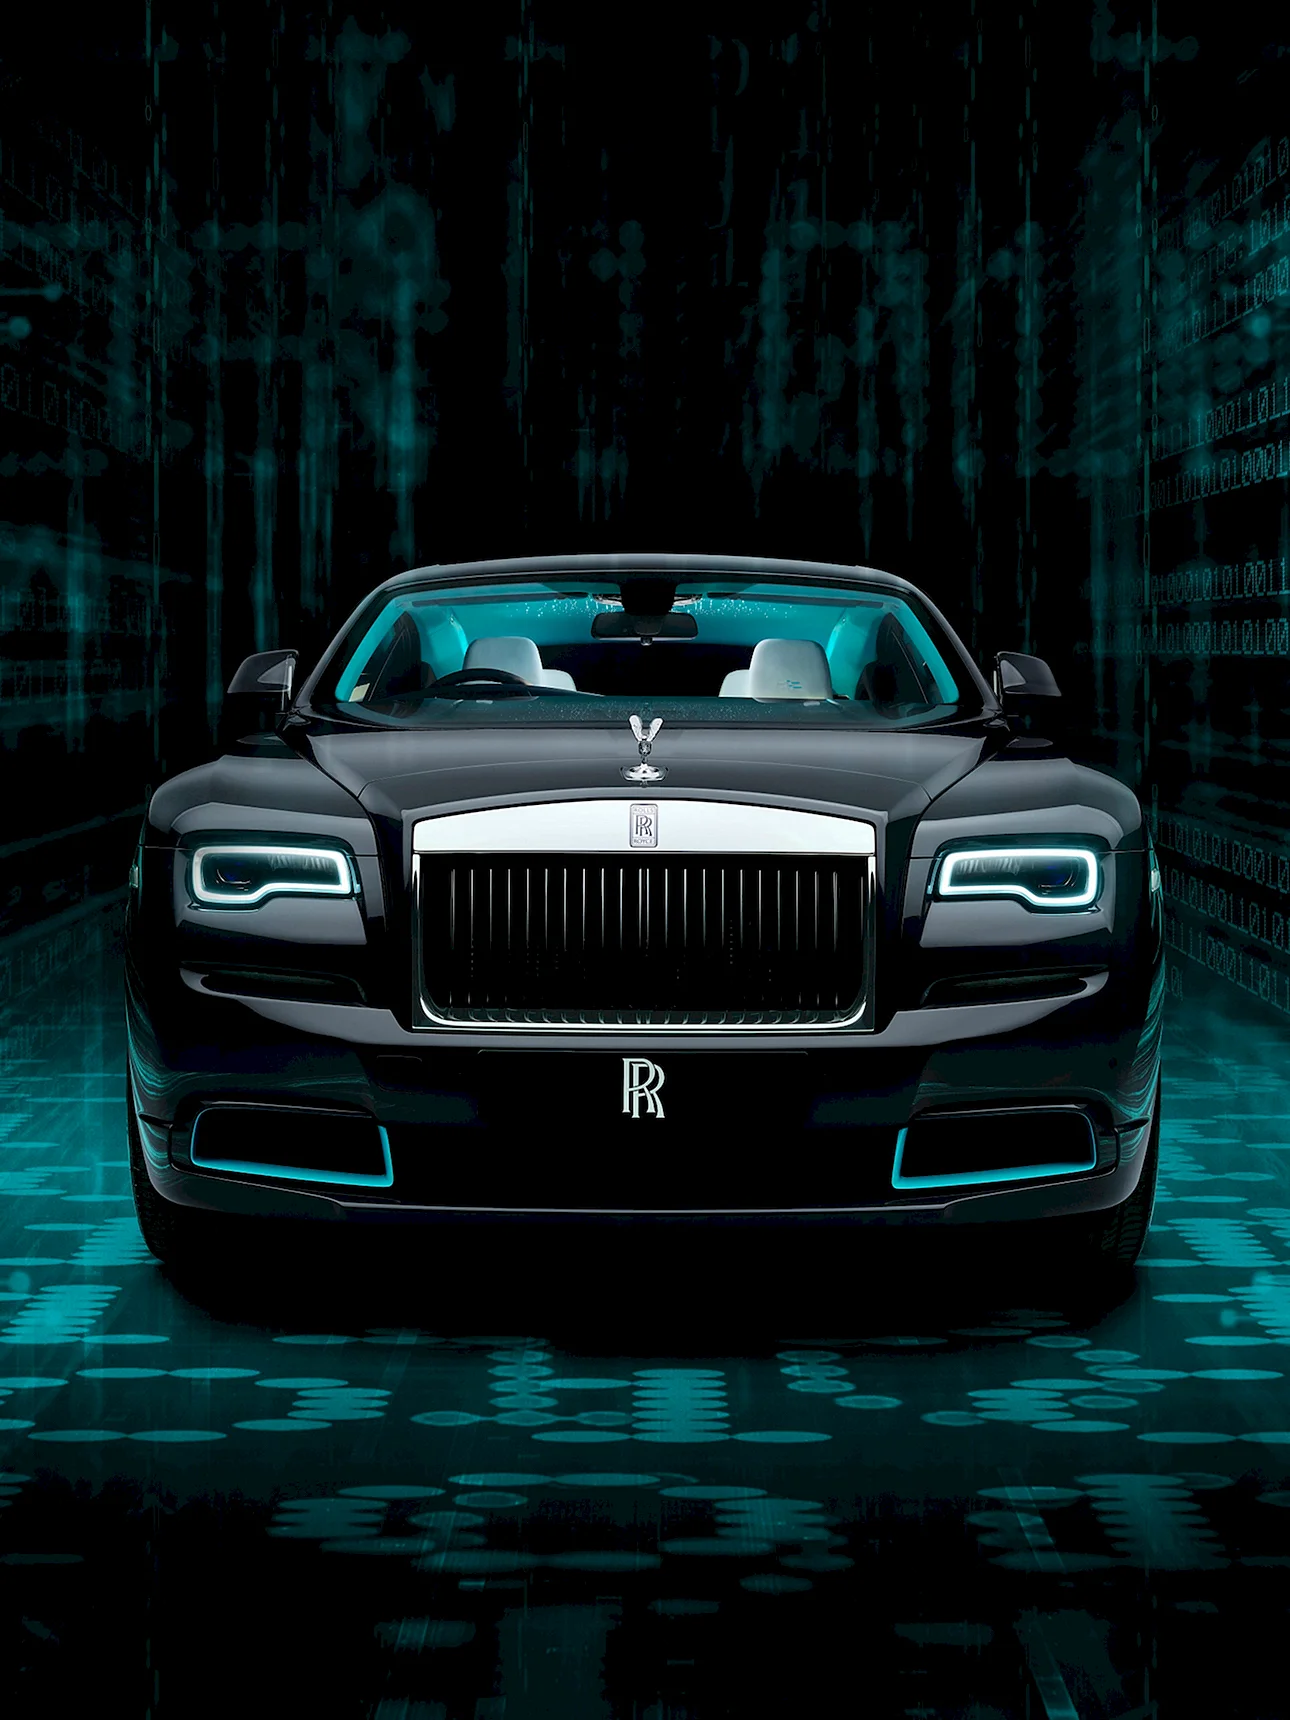 Rolls Royce Wraith Wallpaper For iPhone